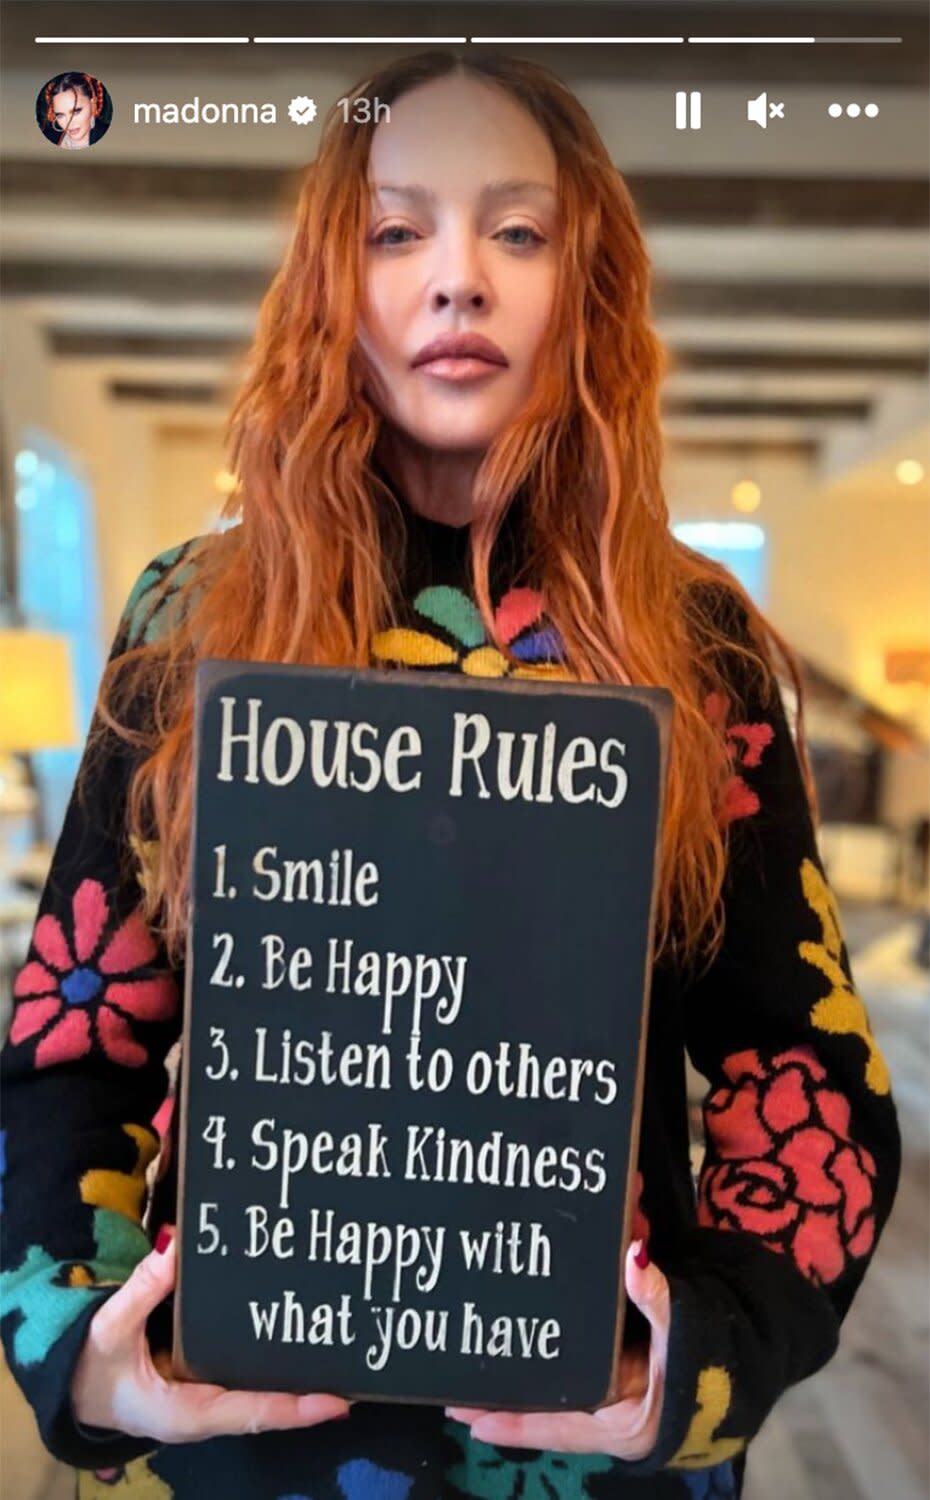 Madonna Shares Her 5 House Rules For Her Kids: ‘Be Happy With What You Have’